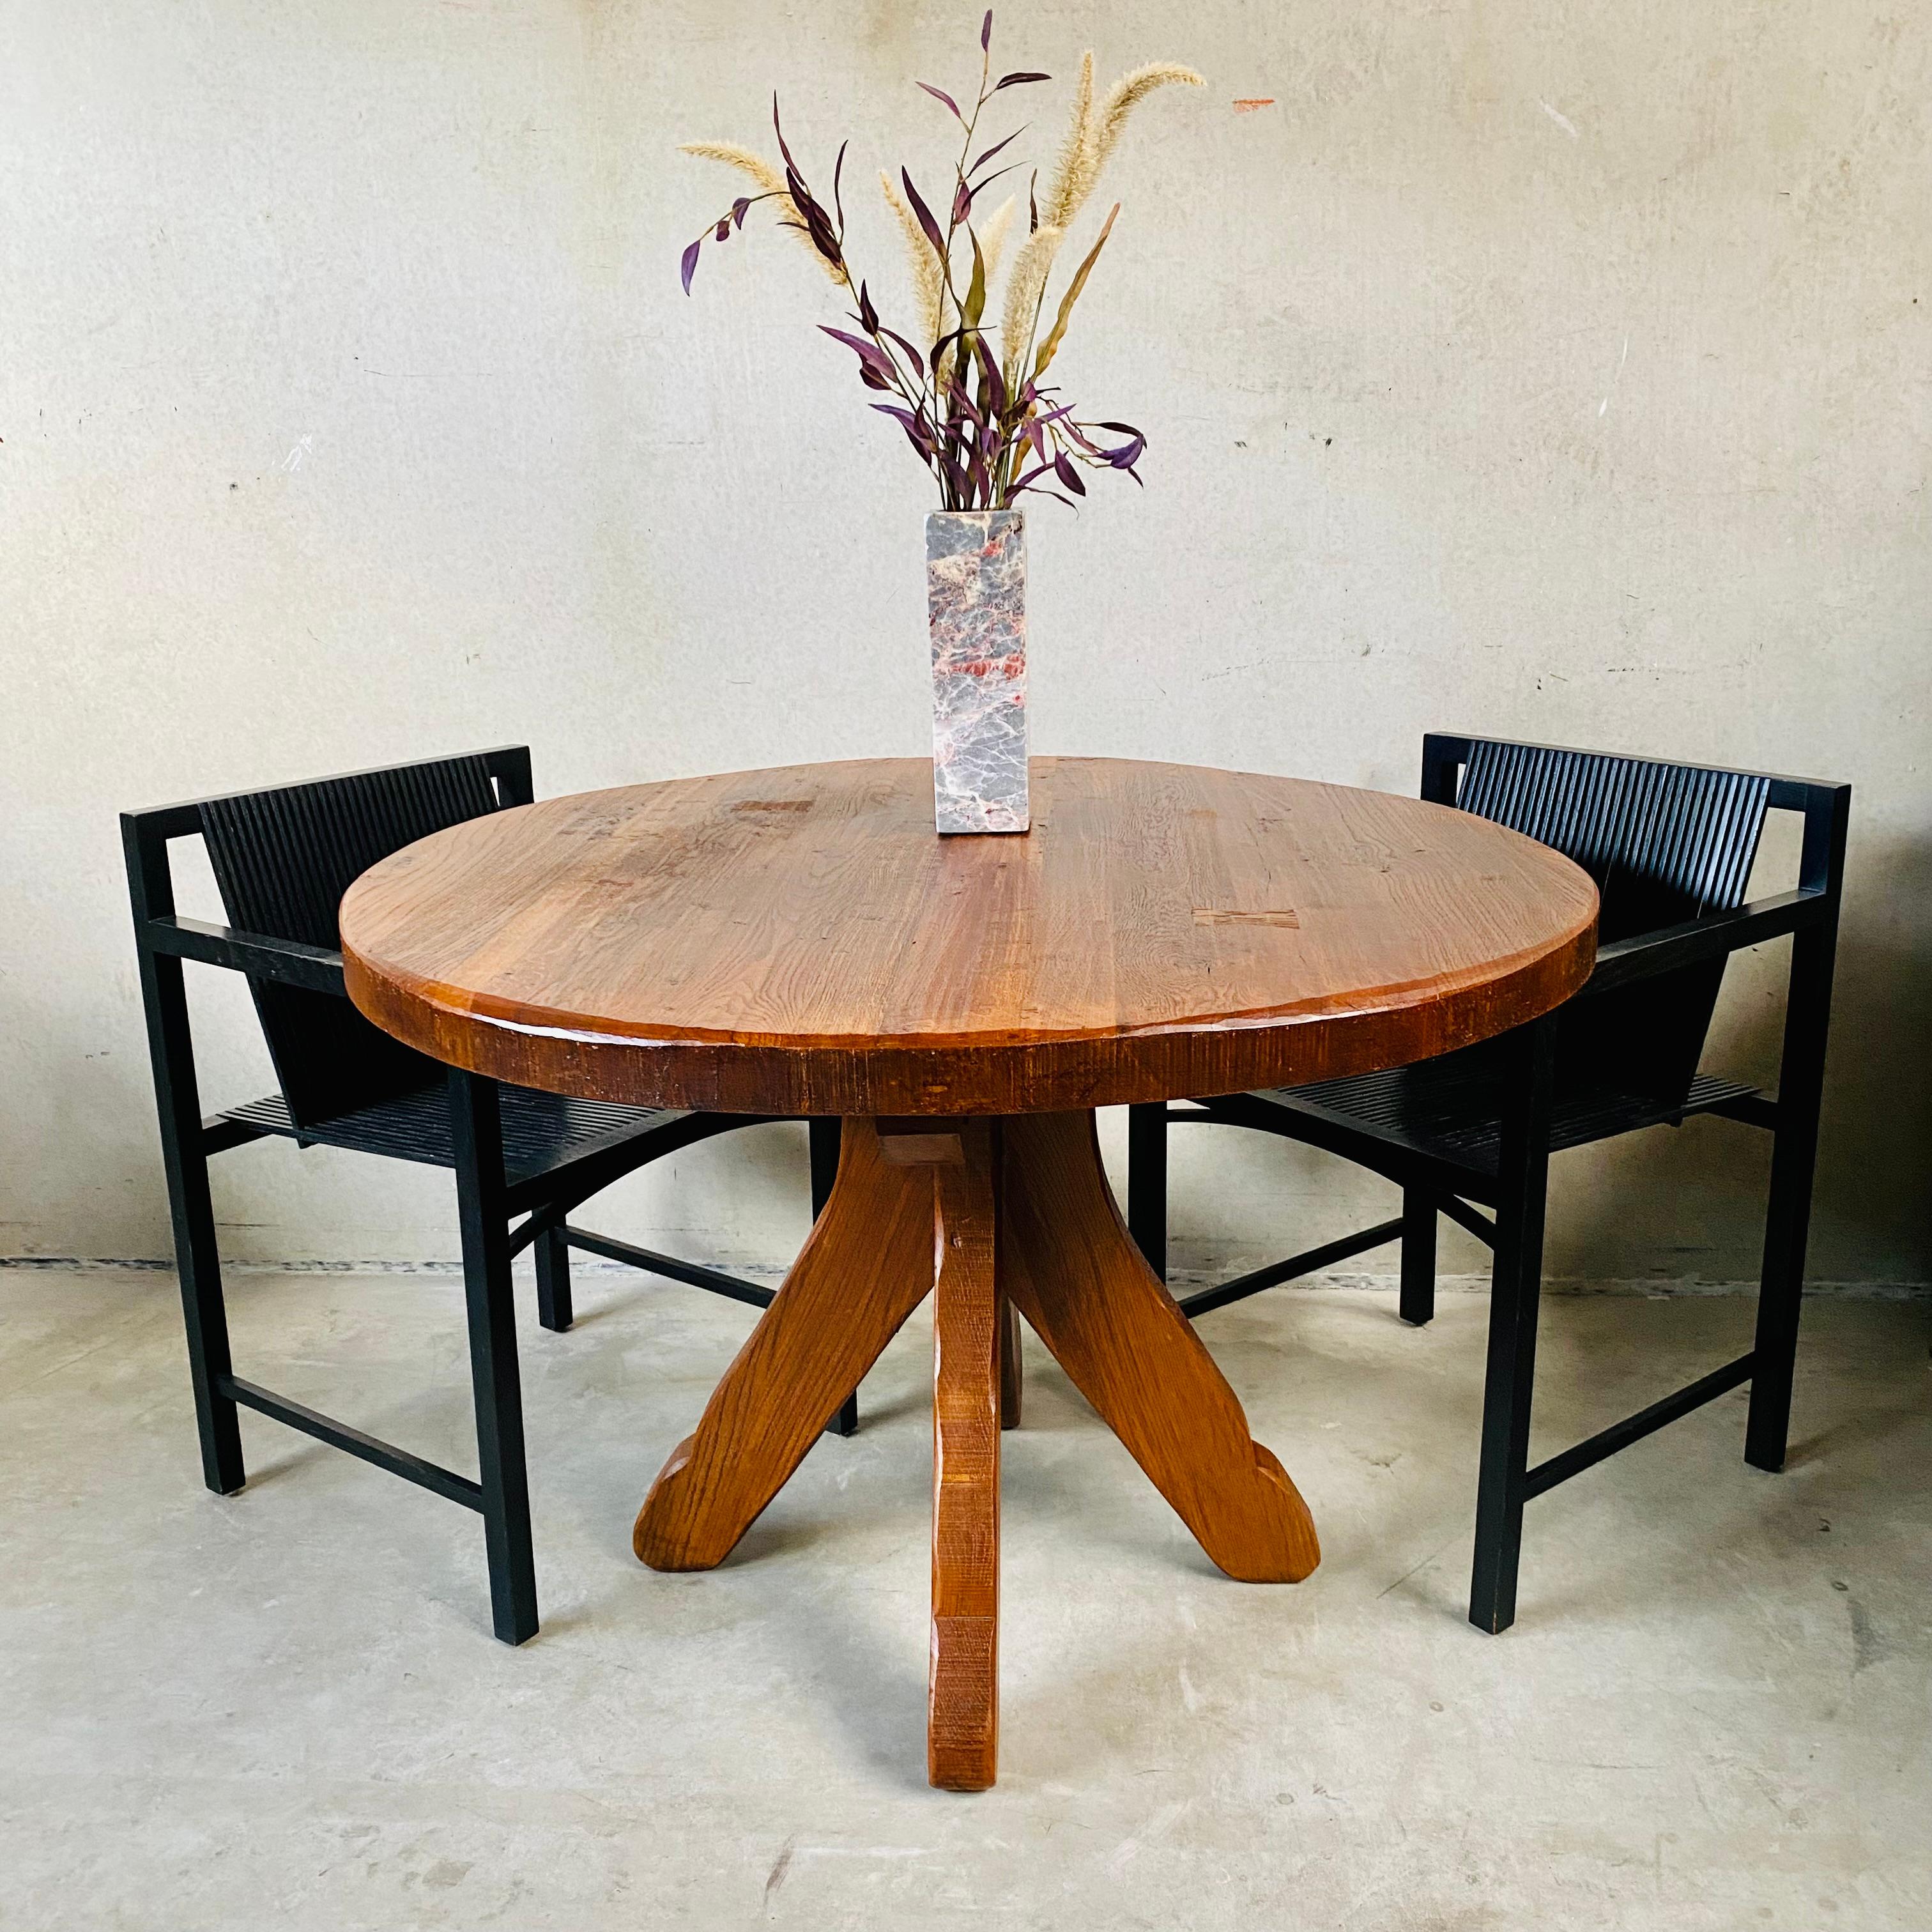 Introducing the Mid-century De Puydt Natural Oak Dining Table: A Timeless Blend of Elegance and Brutalist Charm

Immerse yourself in the allure of the Mid-century De Puydt Natural Oak Dining Table – a captivating masterpiece from the renowned